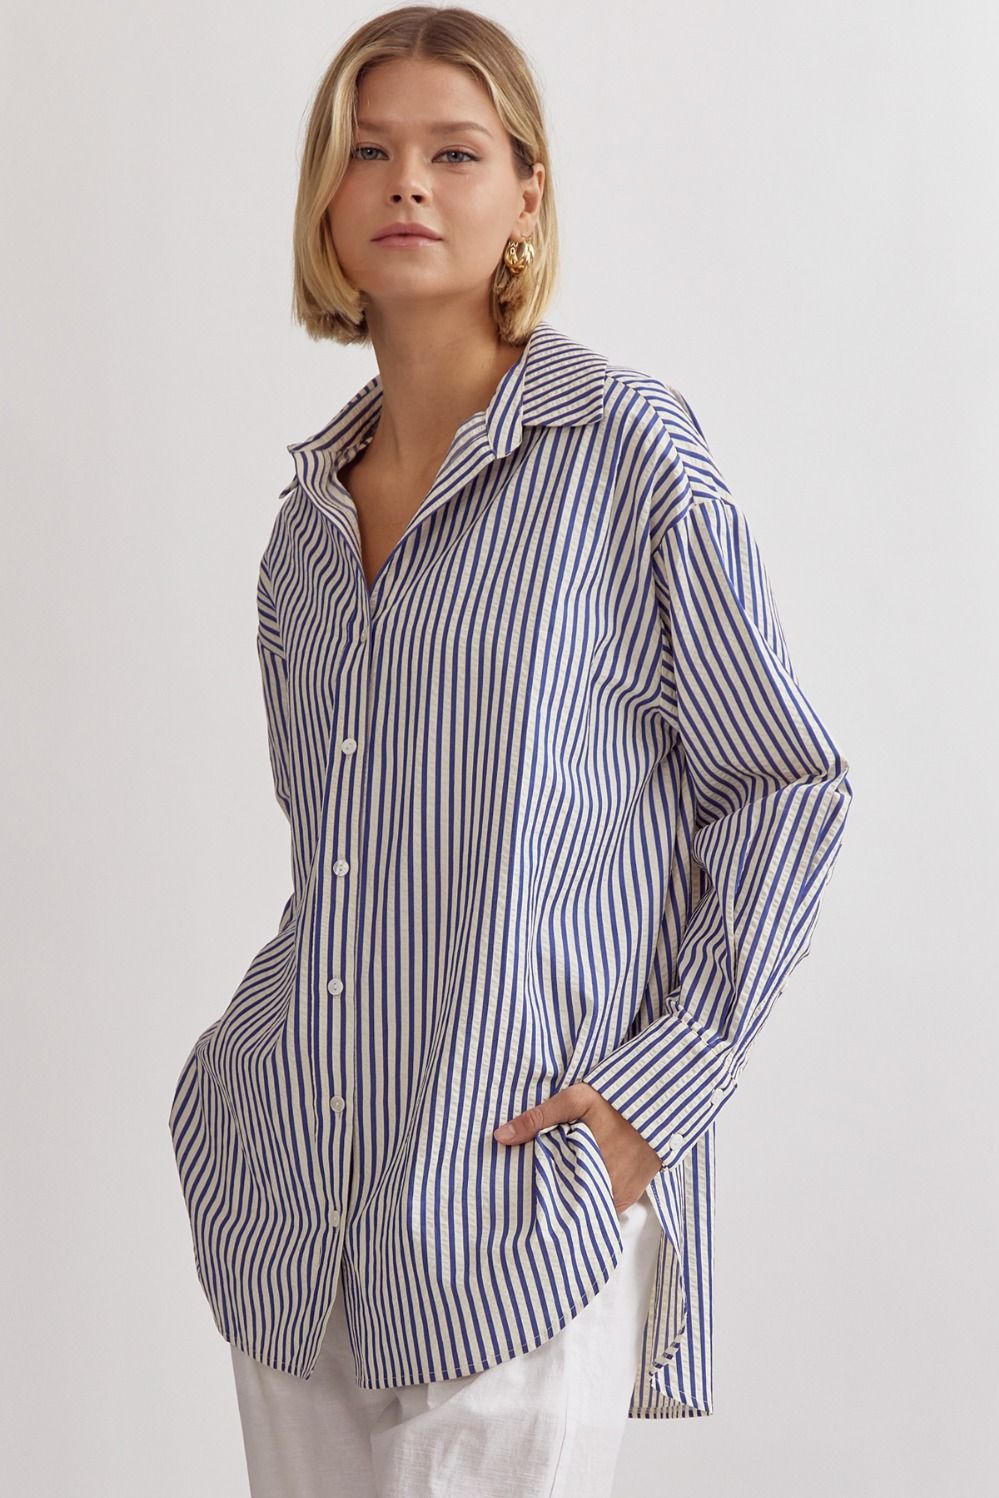 Dianna Classic Stripe Long Sleeve Collared Button Up Blouse - Navy